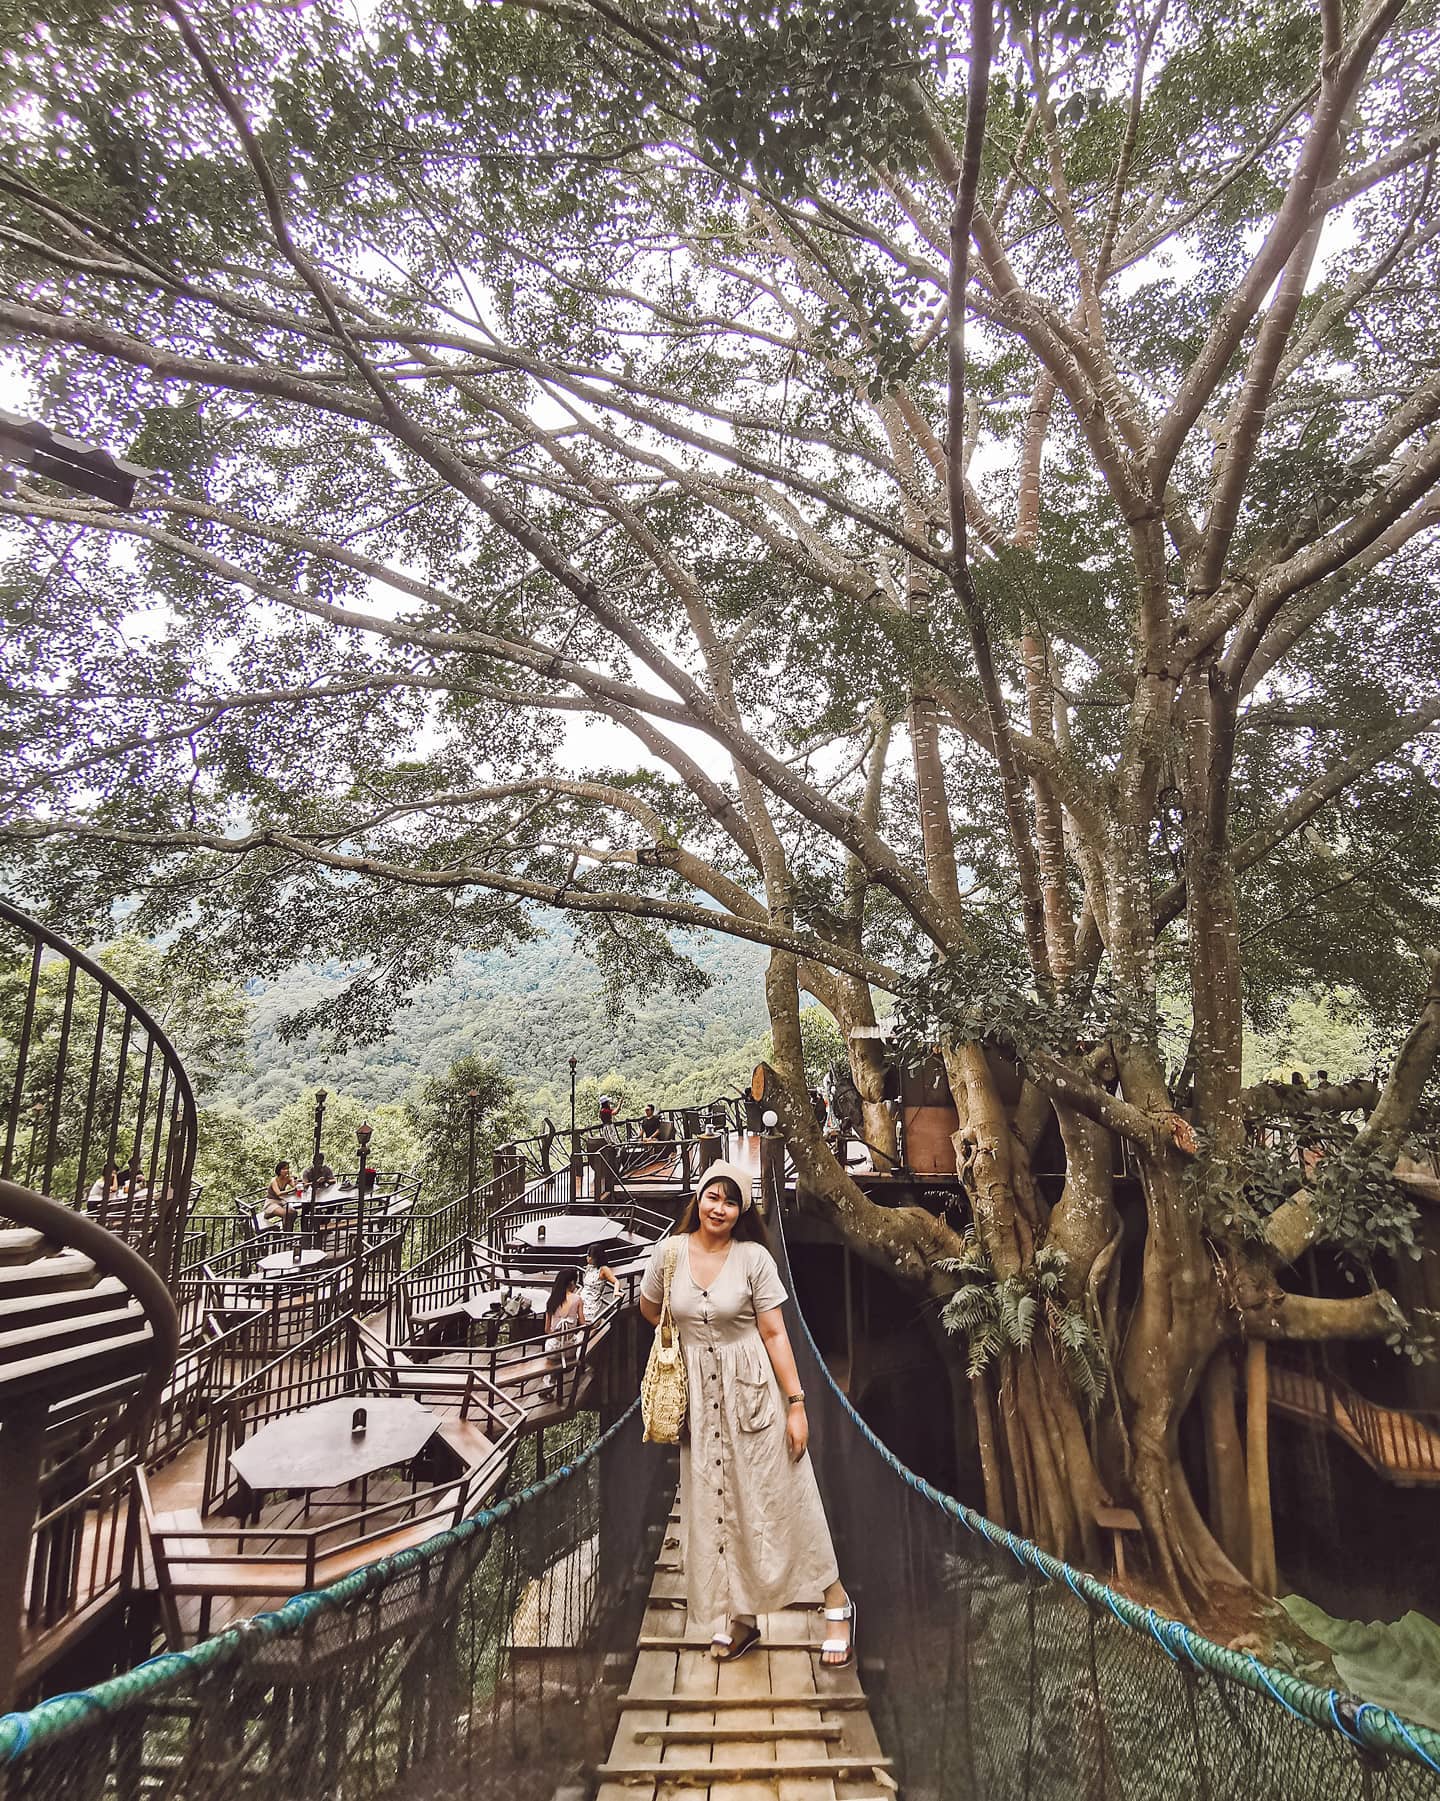 7 Bizzare Foodie Experience The Giant Chiang Mai Tree Cafe